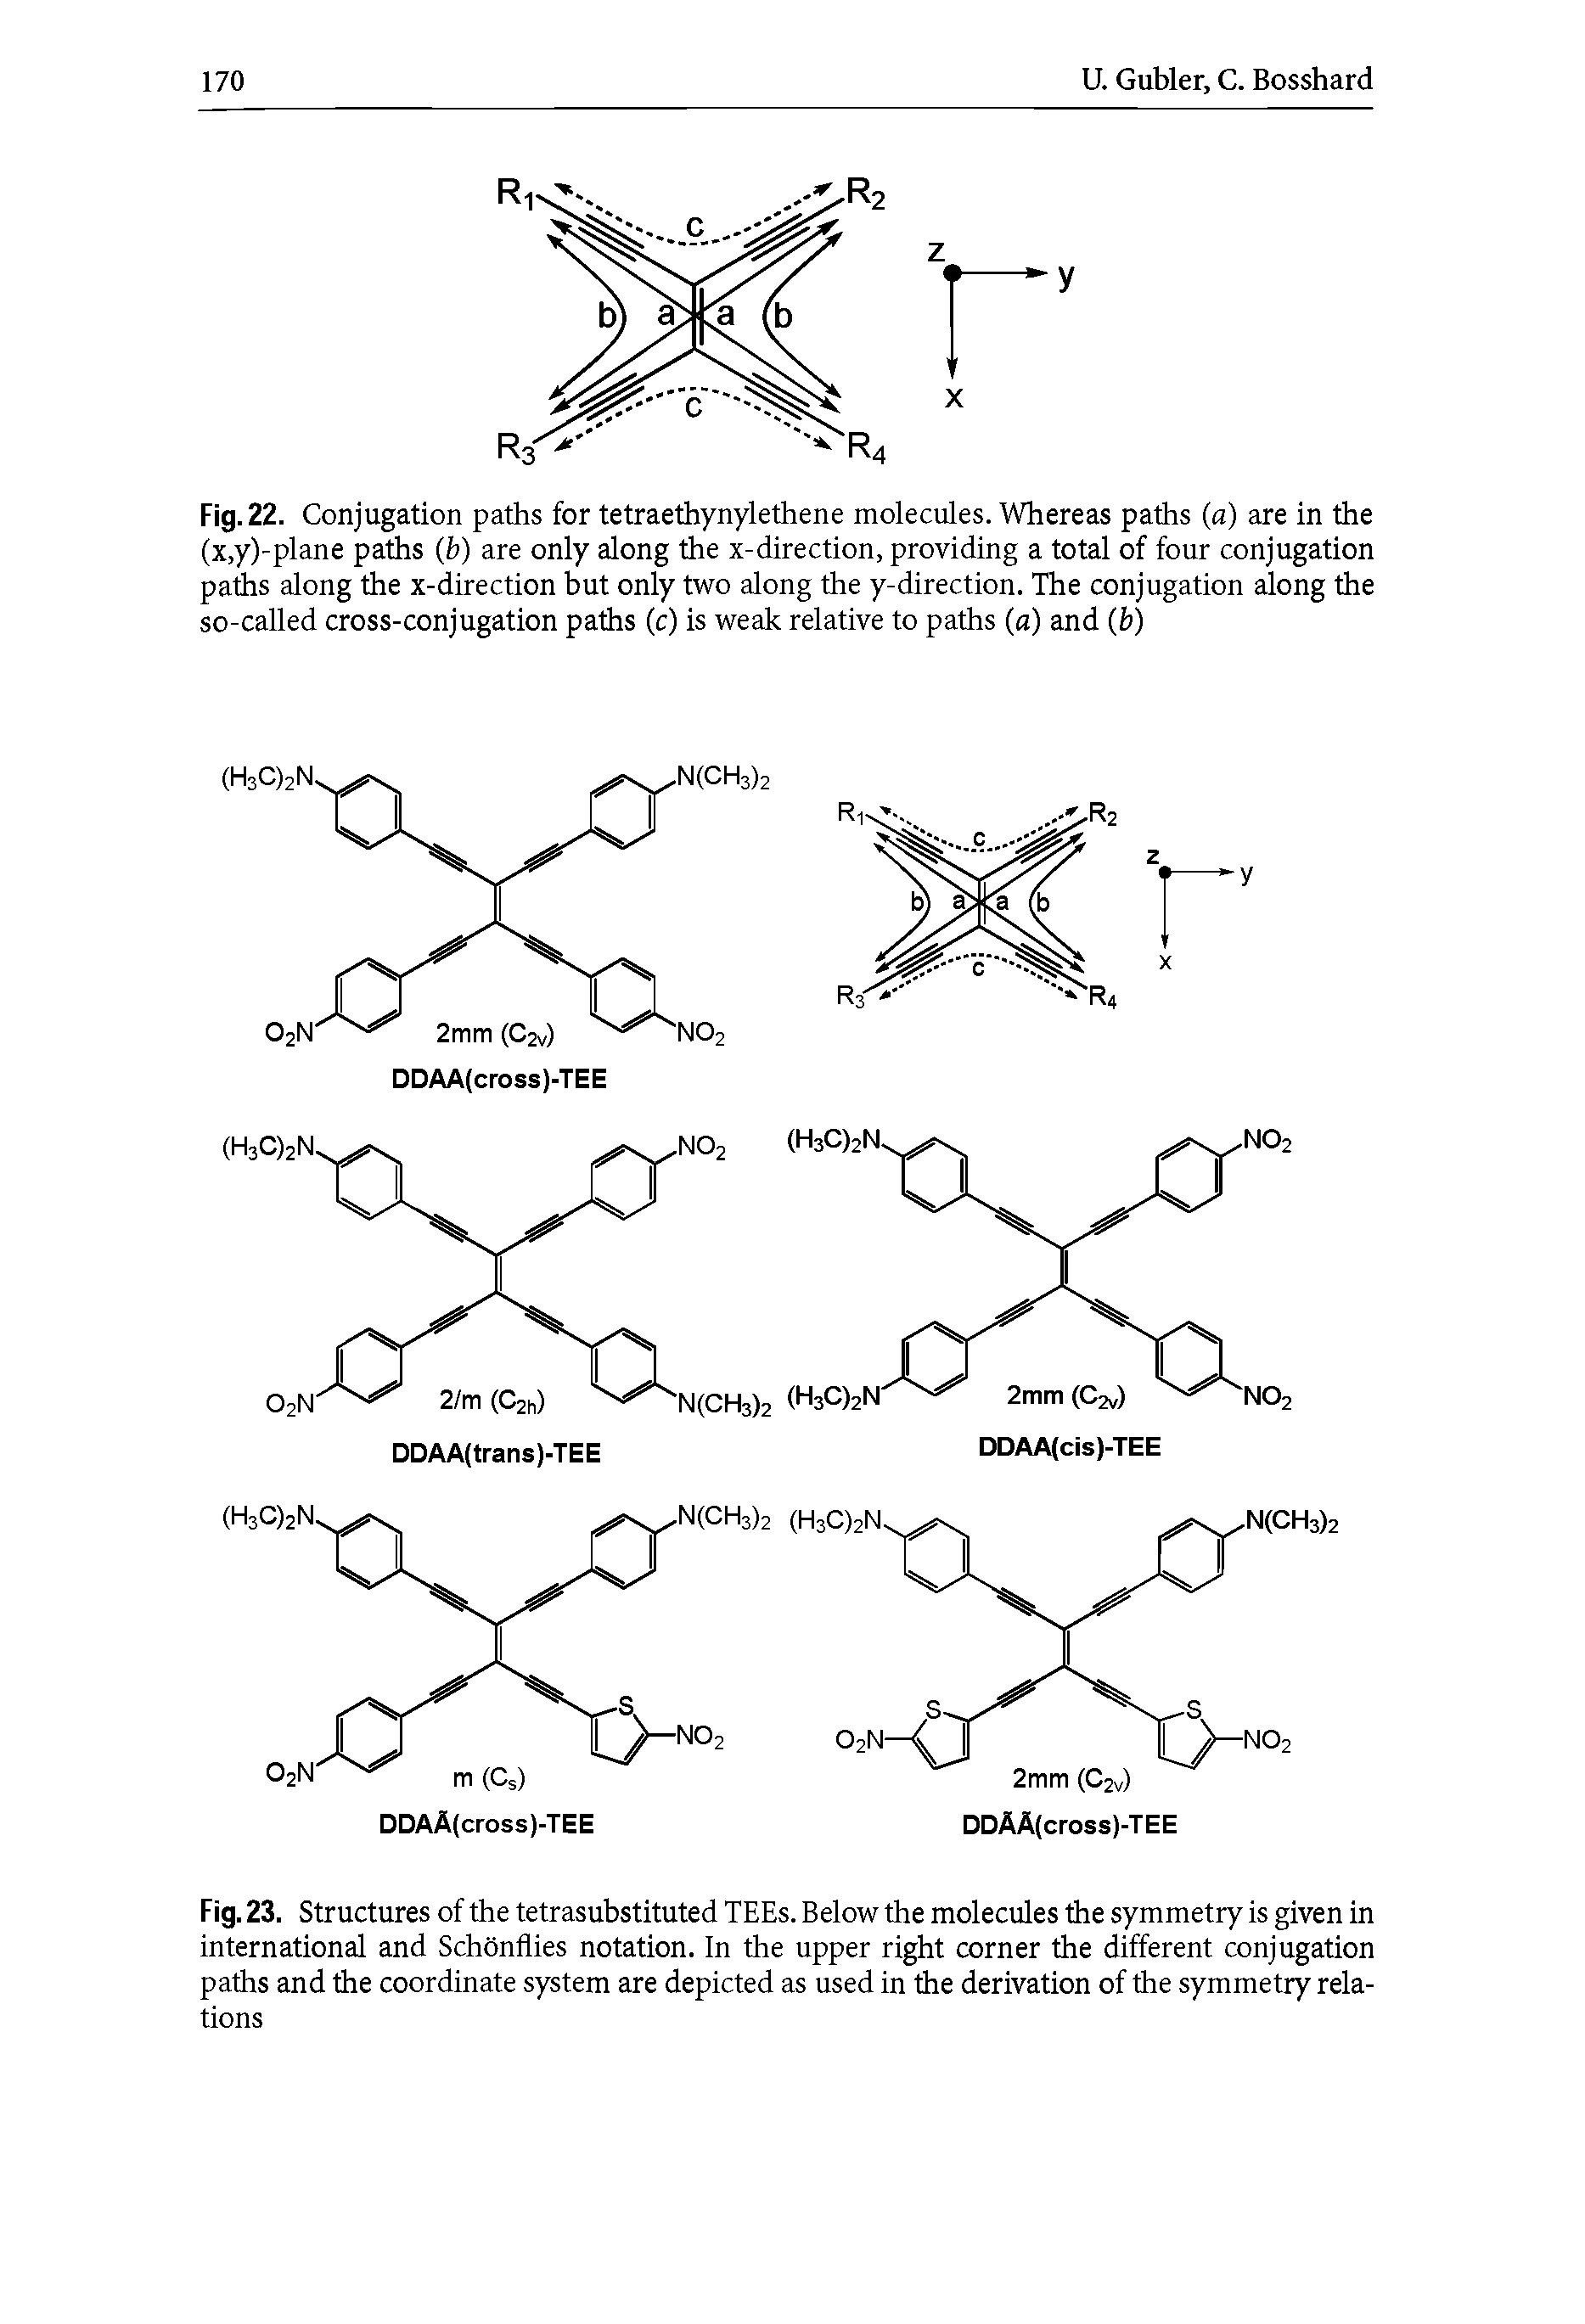 Fig. 23. Structures of the tetrasubstituted TEEs. Below the molecules the symmetry is given in international and Schonflies notation. In the upper right corner the different conjugation paths and the coordinate system are depicted as used in the derivation of the symmetry relations...